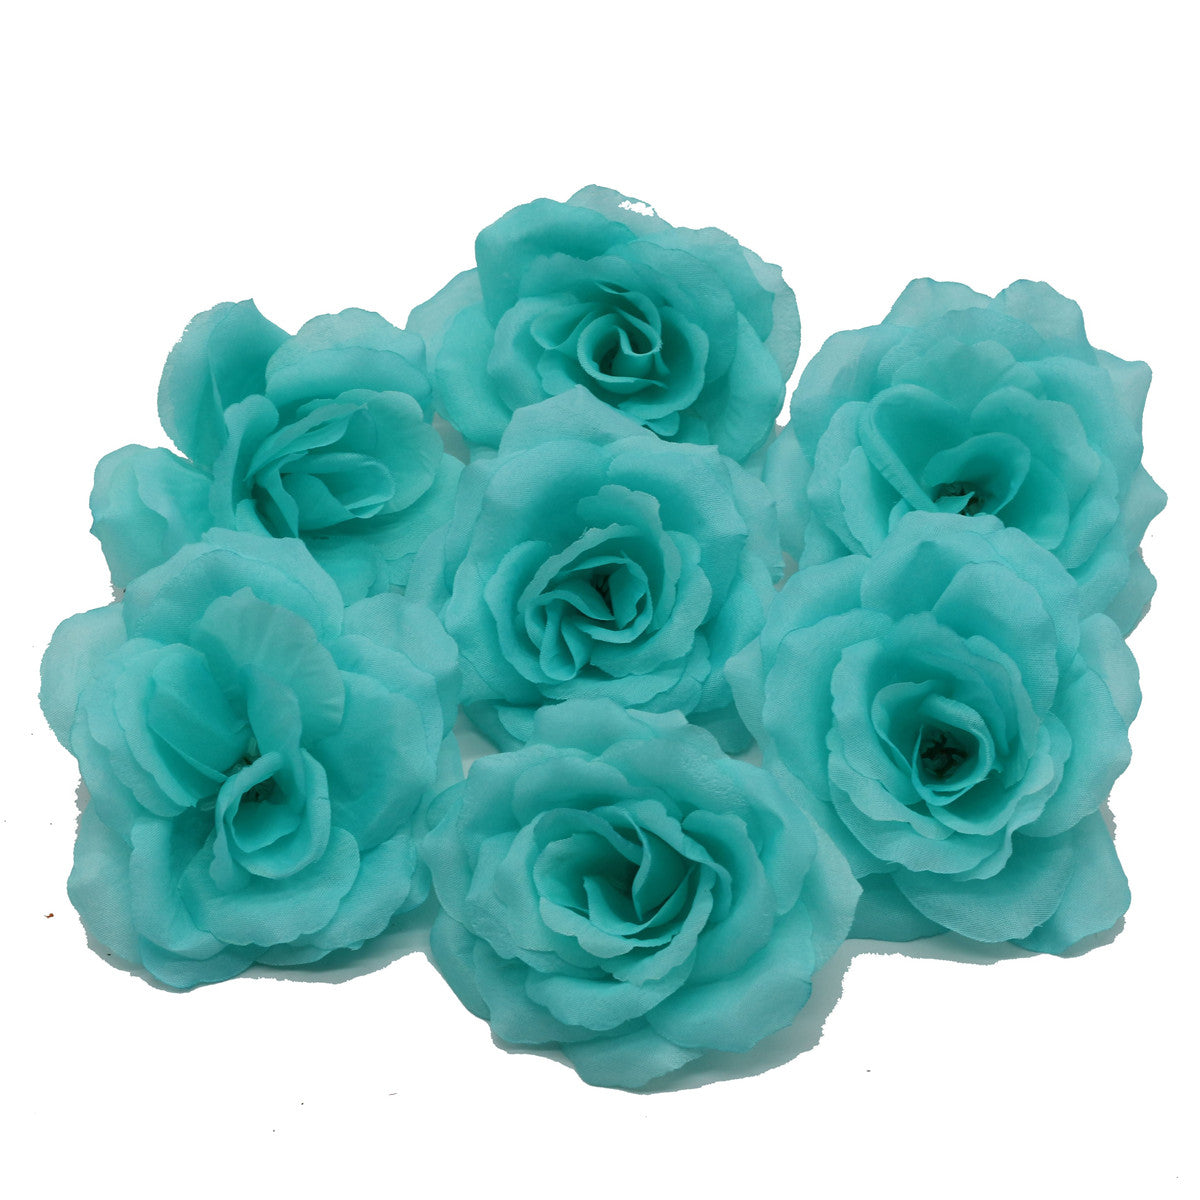 Silk Flower Heads 100 Bulk Wholesale Artificial Flowers 4 inches Roses 20 Colors